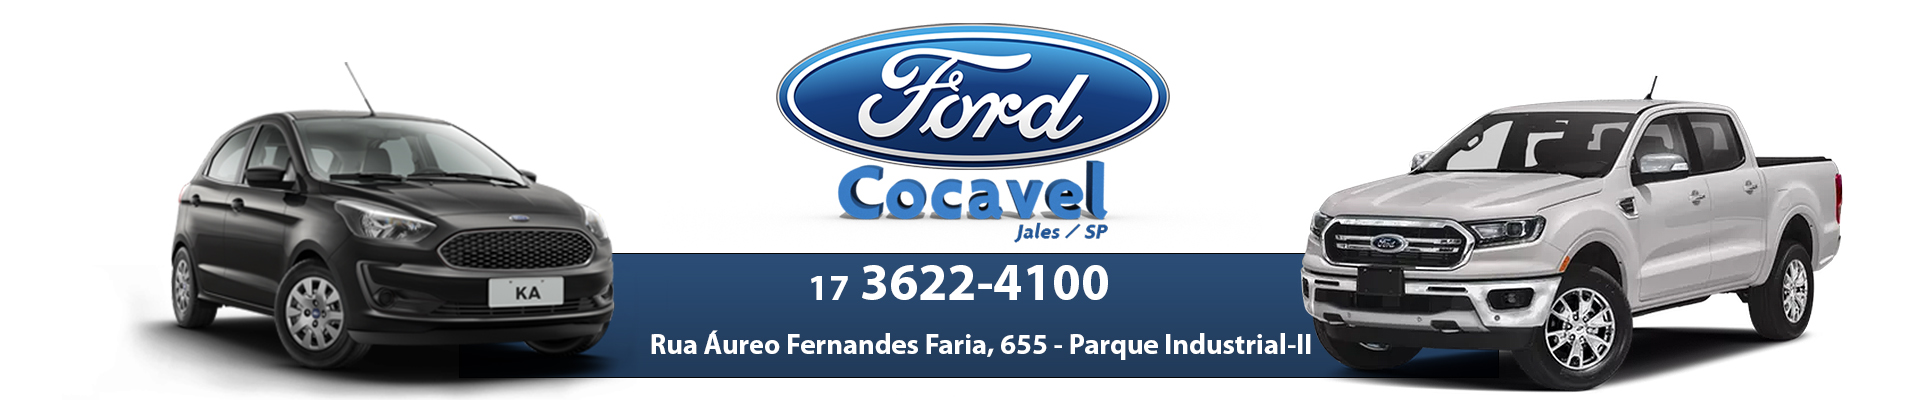 Ford Cocavel - Jales